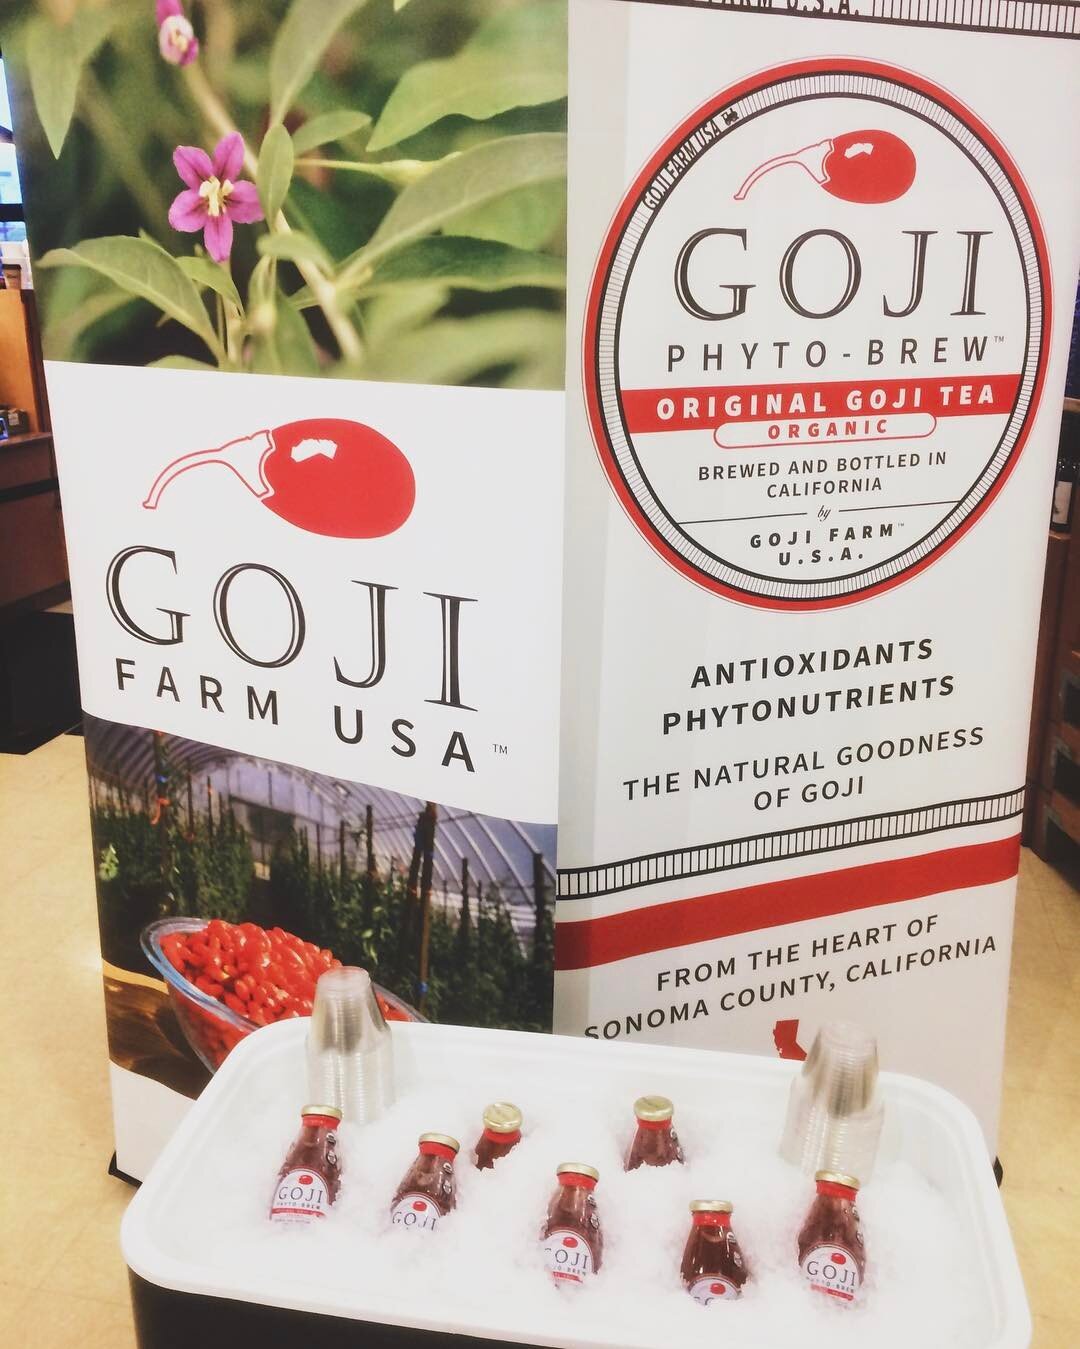 We're at @oliversmarket in #Windsor today from 11-2 giving out free samples of our incredible antioxidant drink, Goji Phyto-Brew! Be sure to stop by and grab some while you still can - 
#sonomacounty #sonoma #bayarea #norcal #goji #gojiberry #gojiber